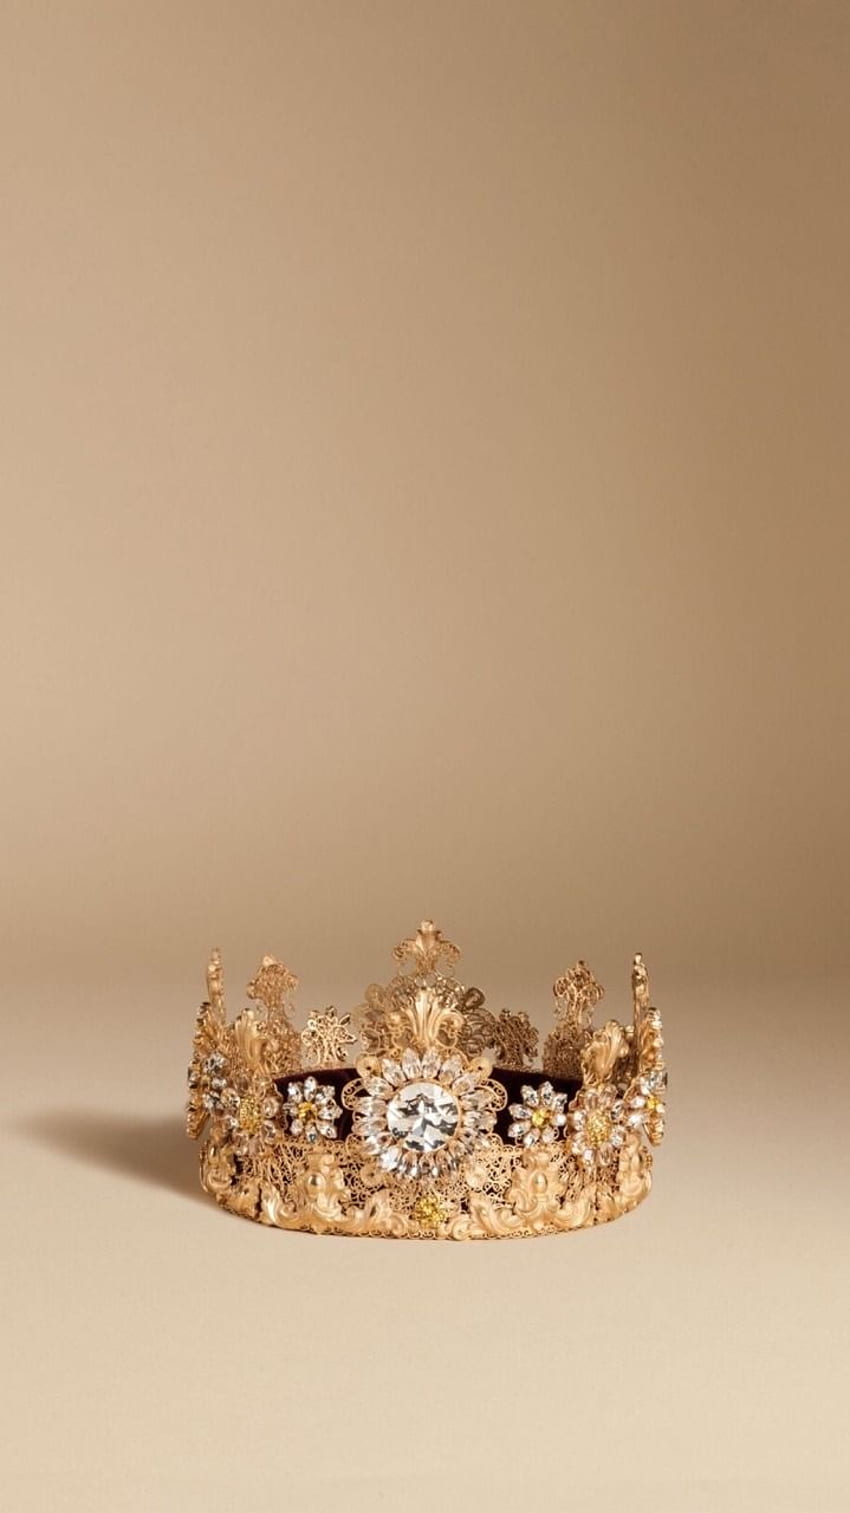 A gold crown with jewels on it - Crown